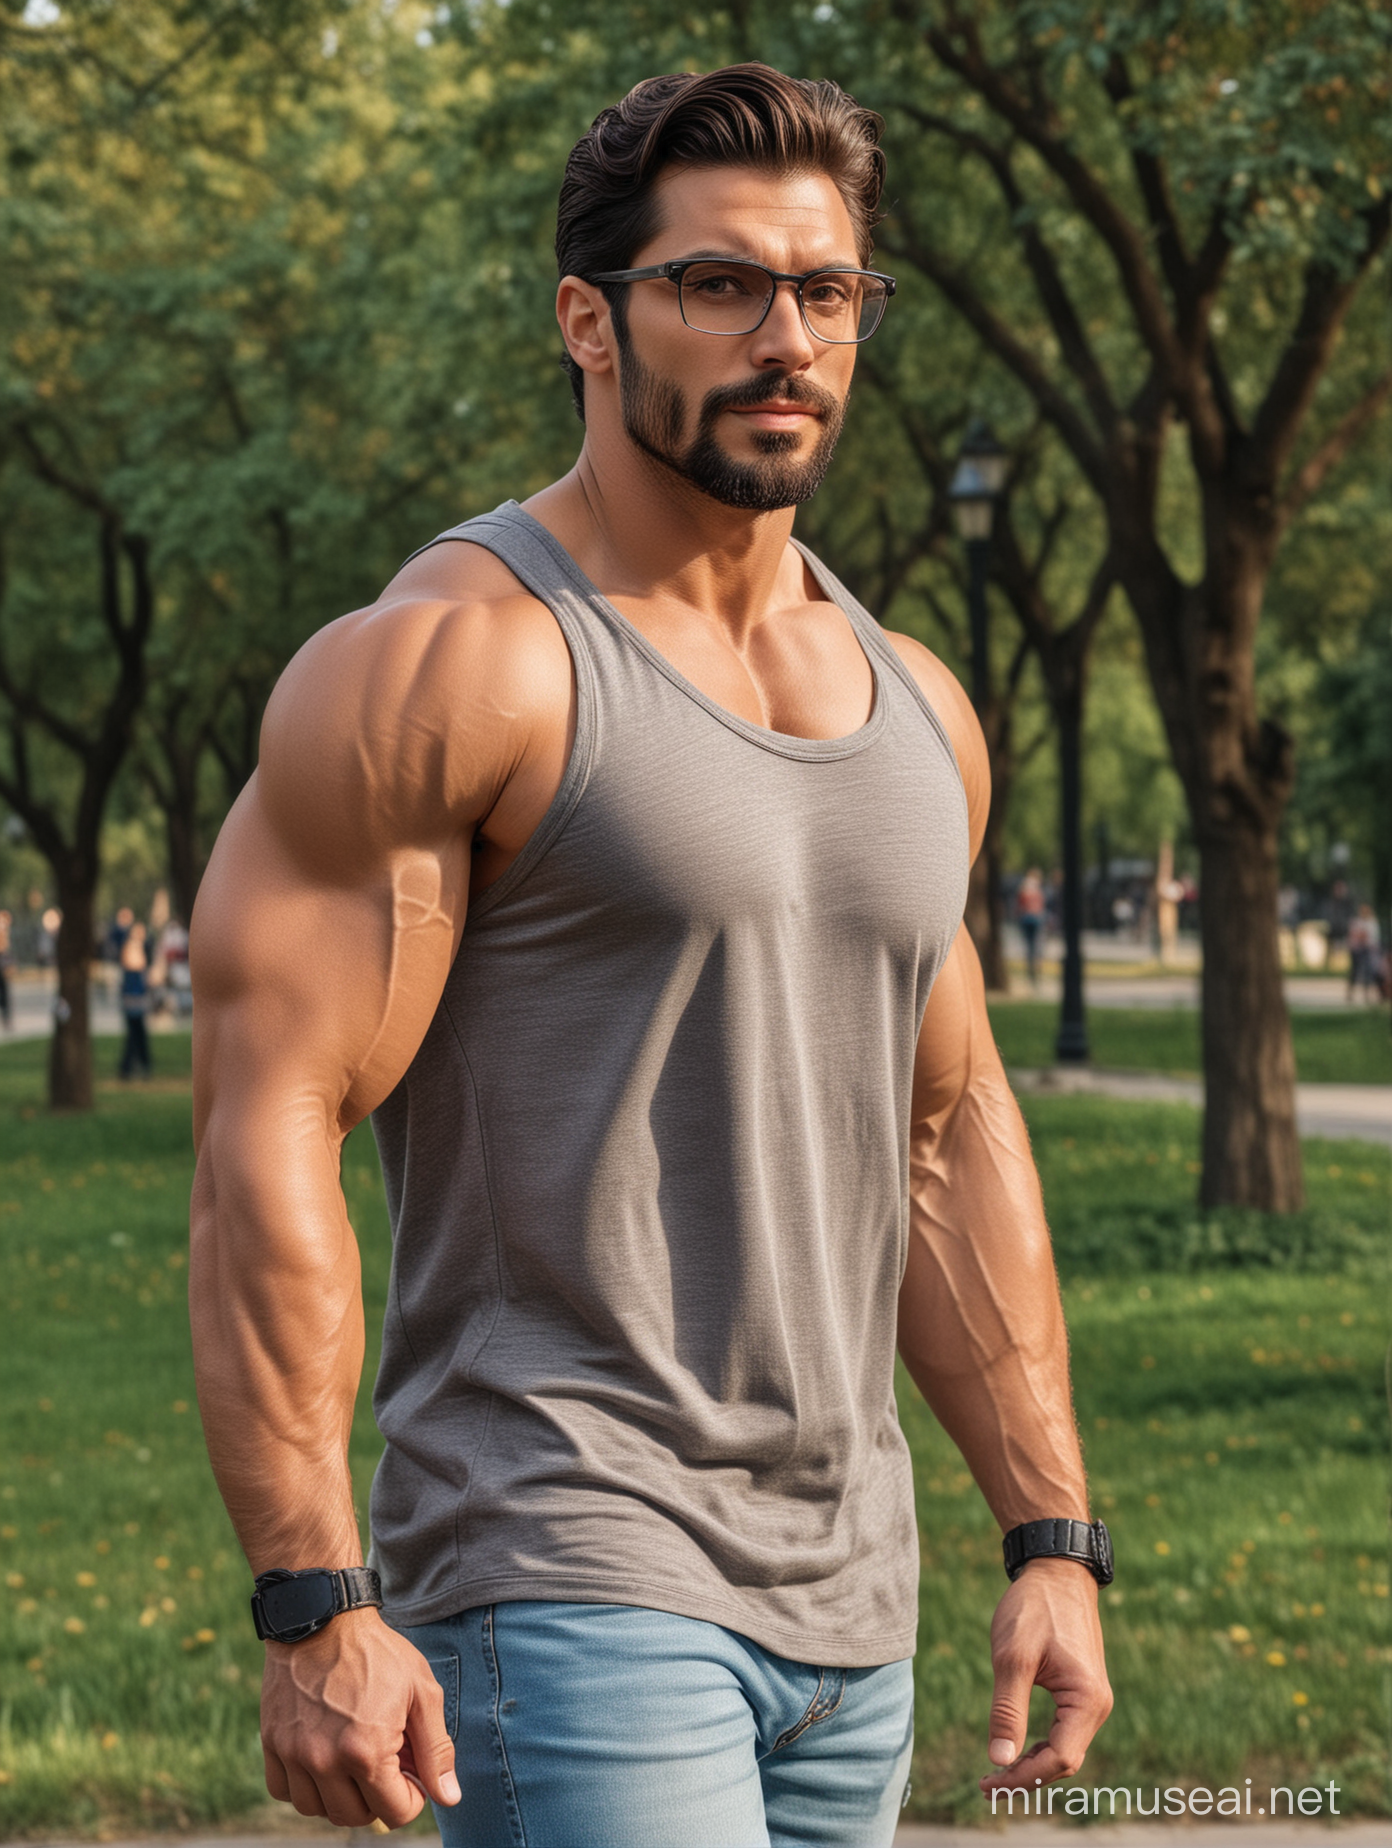 Muscular Superman Strolling Through Park in Stylish Shirt and Glasses